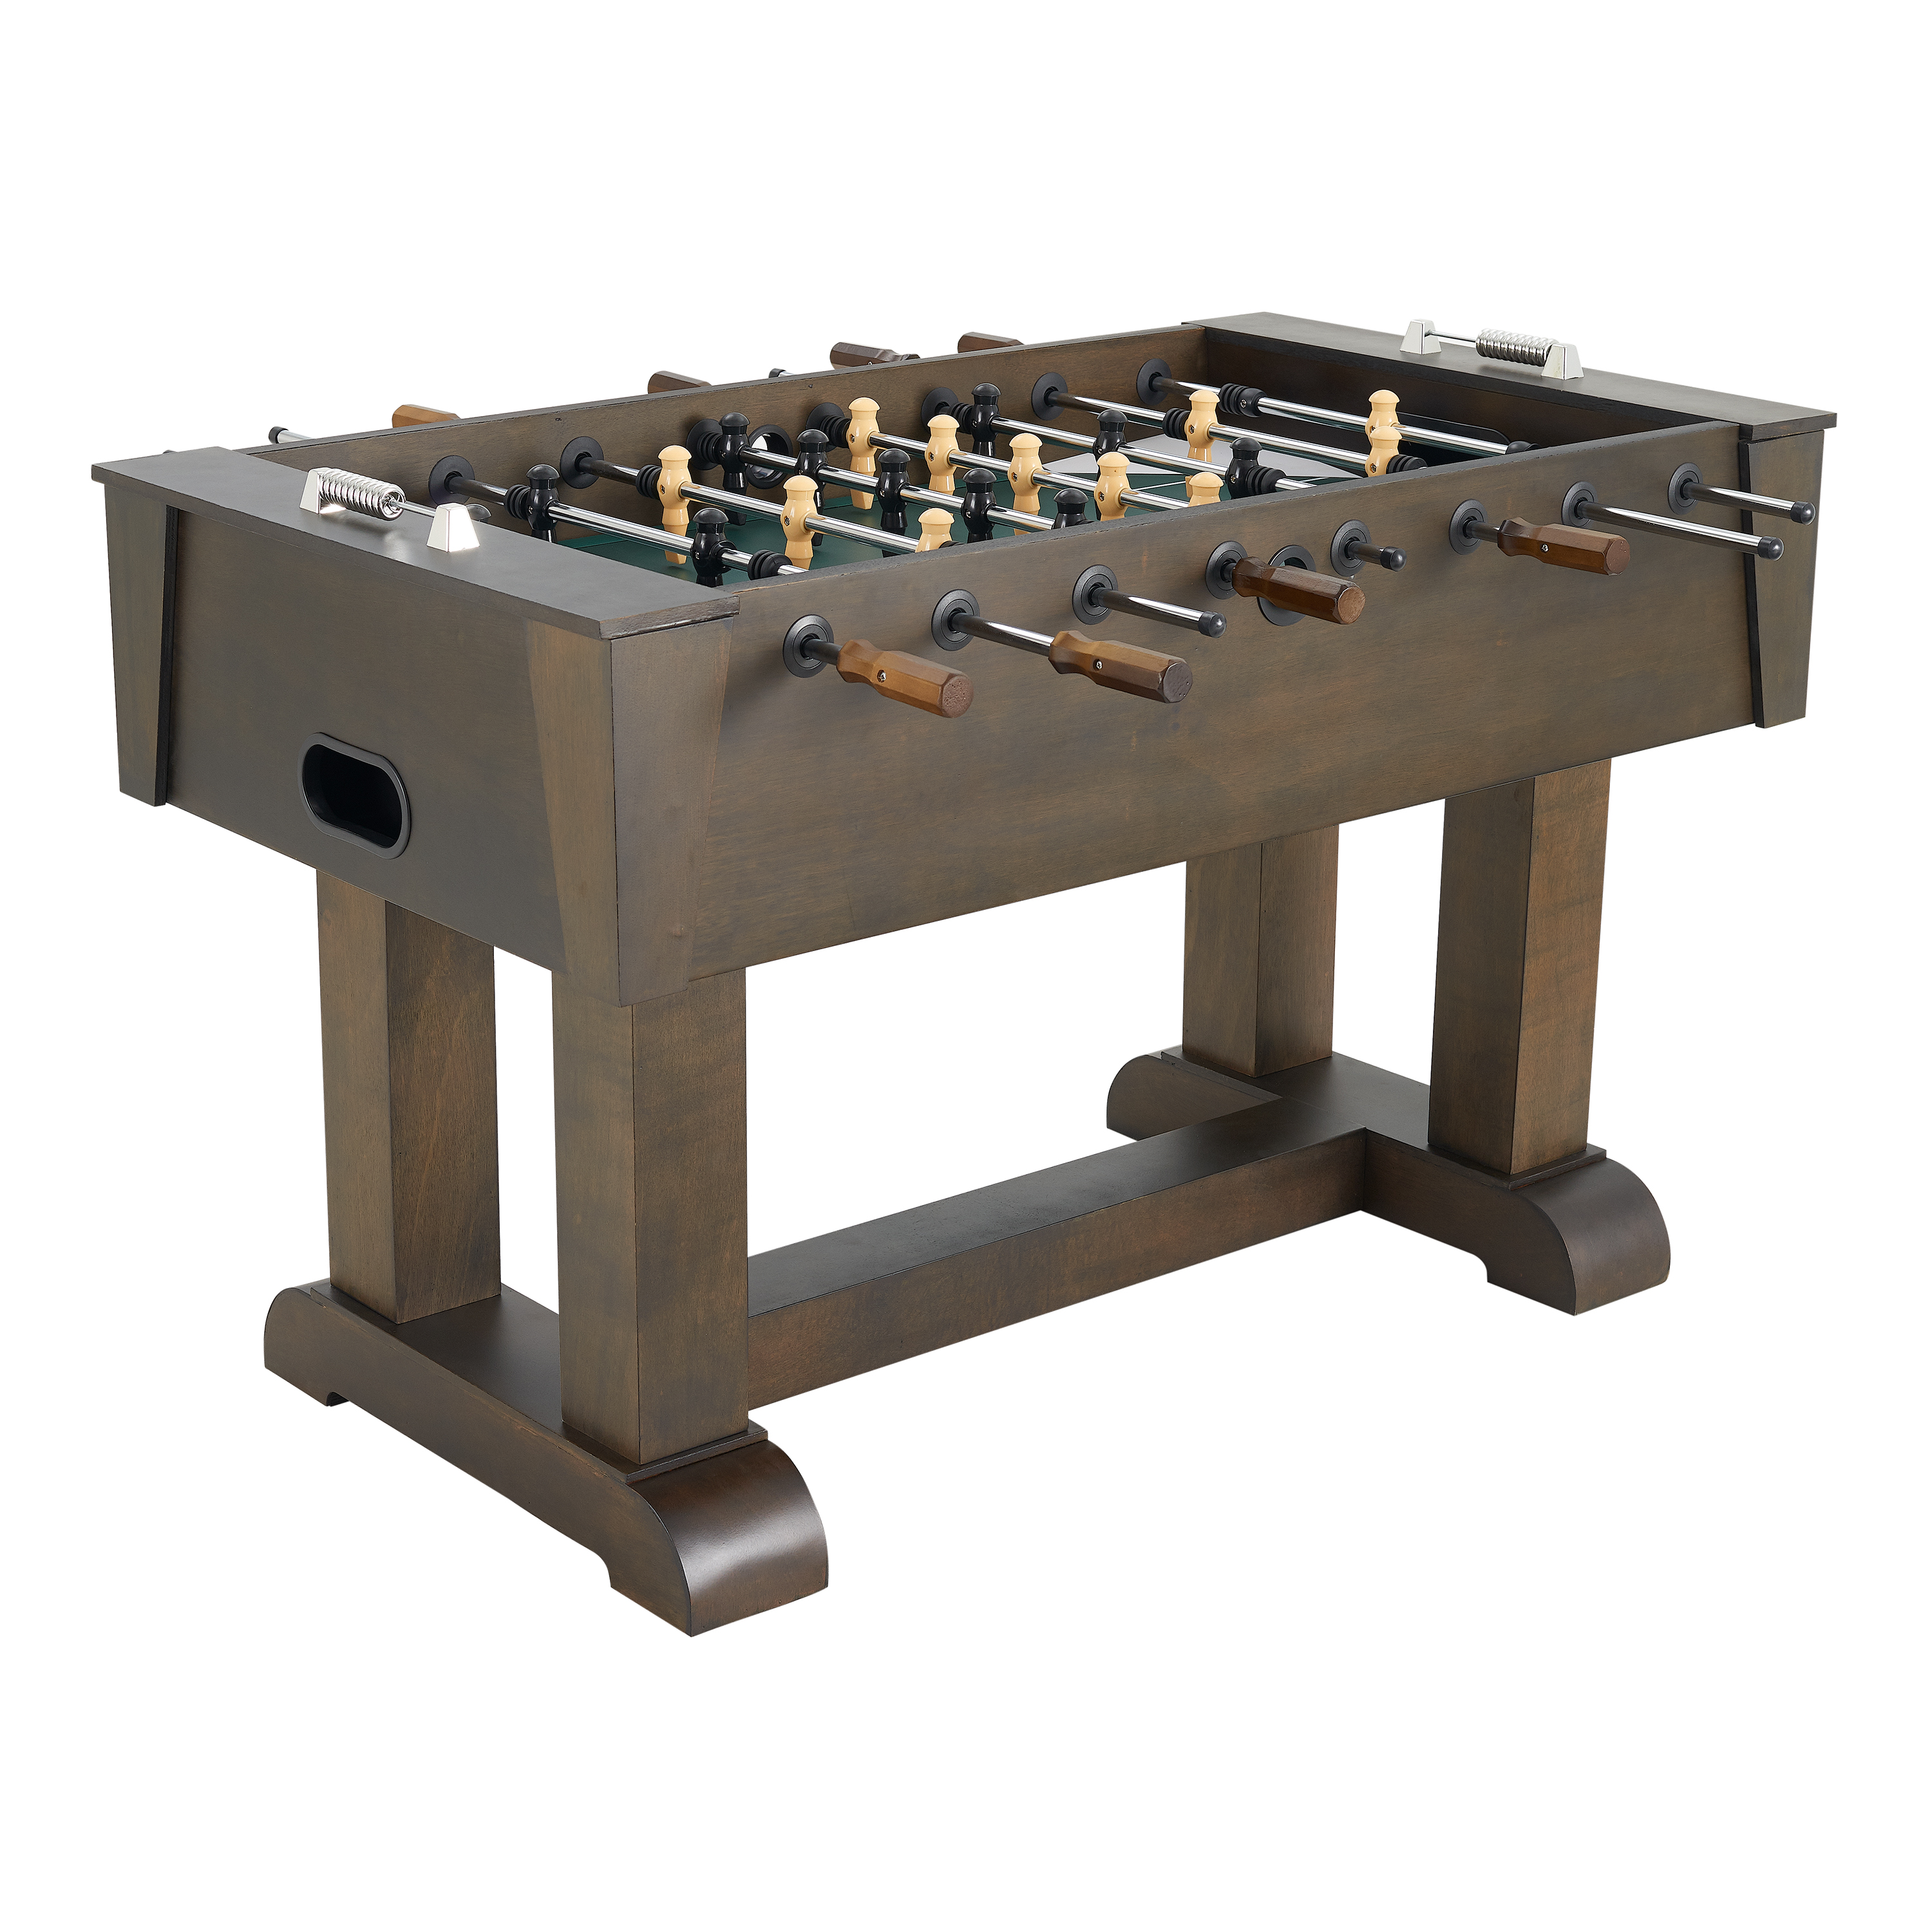 Airzone Official Size Wood Foosball Game Table, 56" - image 1 of 4